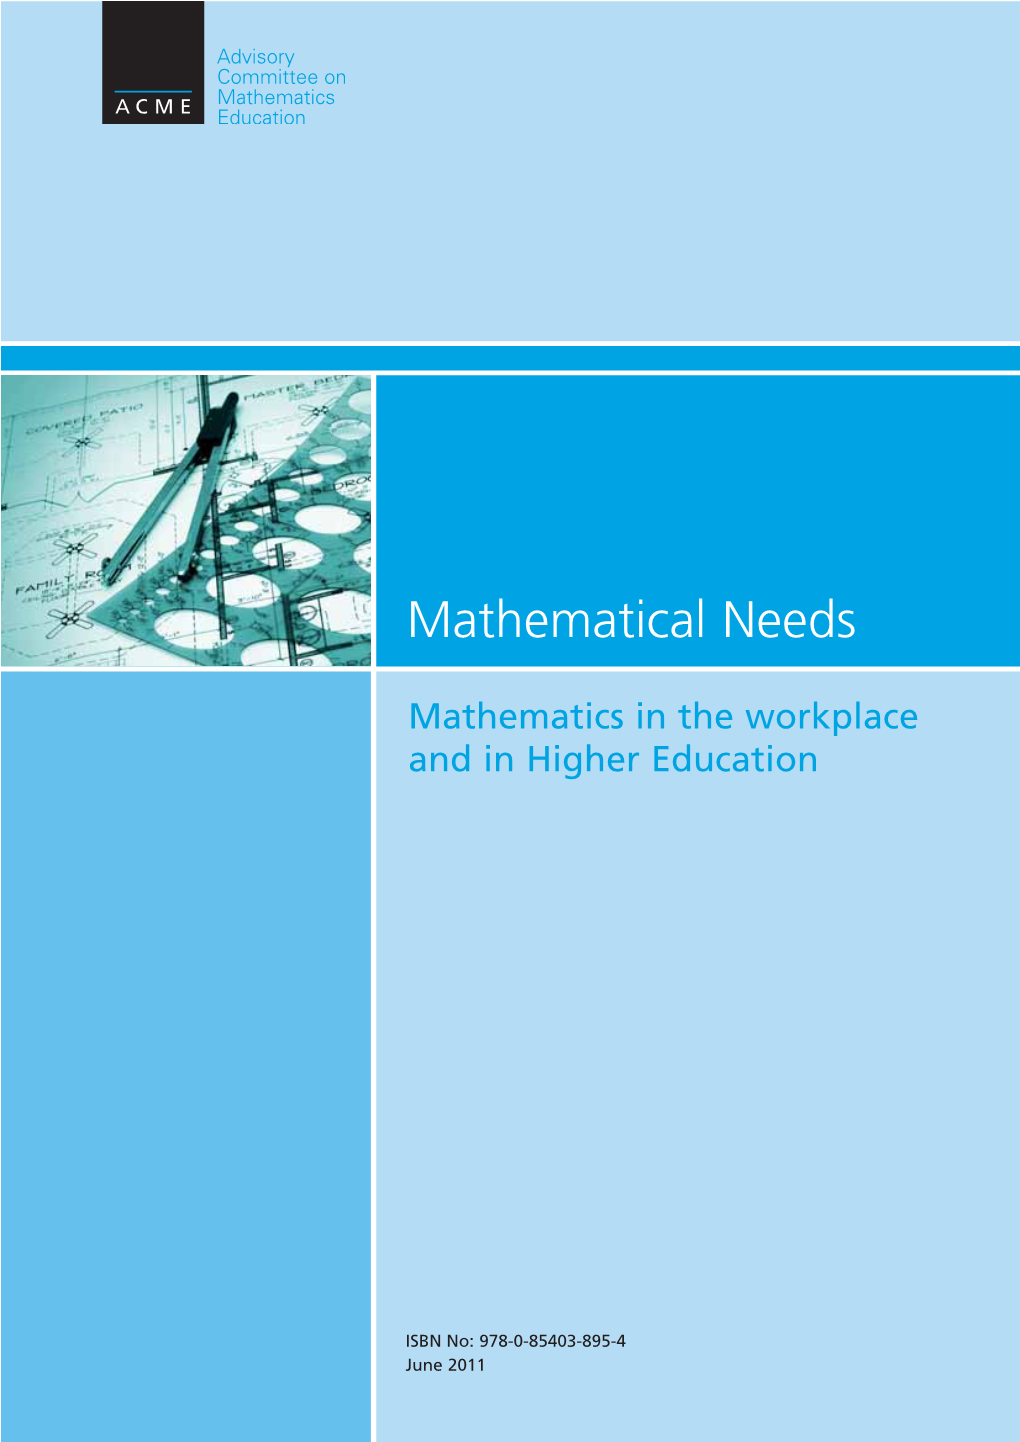 Mathematics in the Workplace and in Higher Education